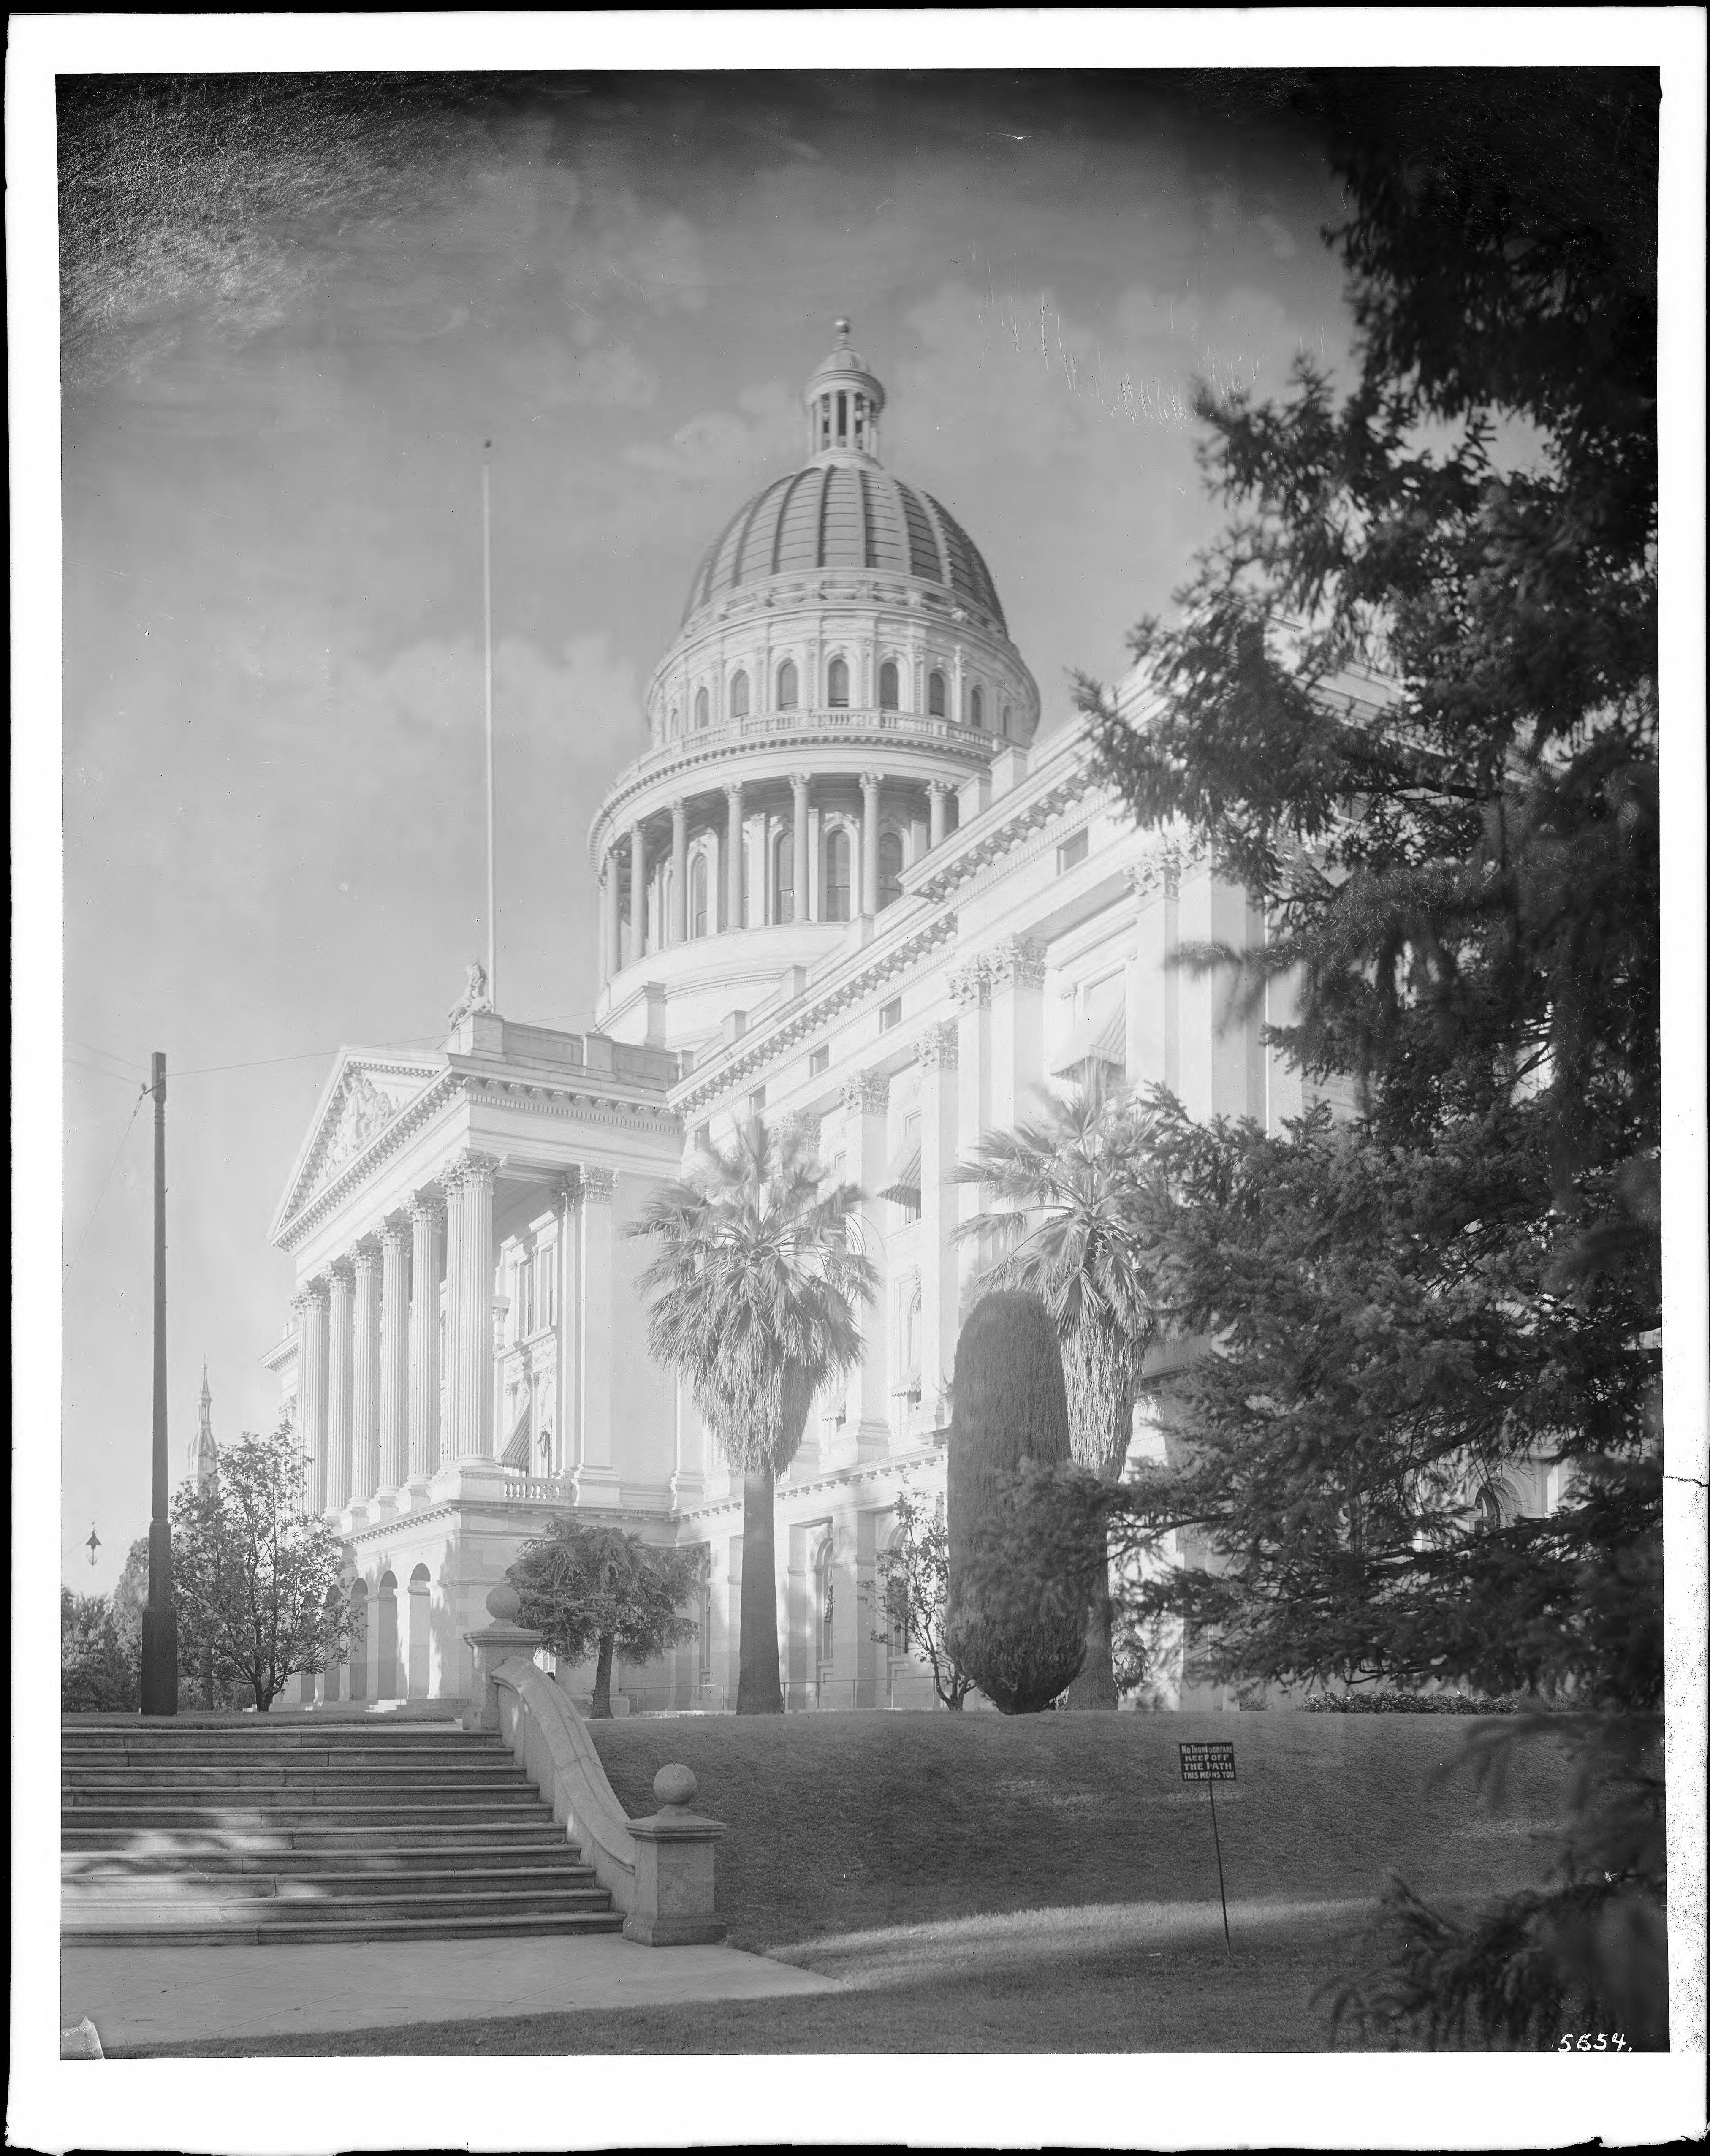 Exterior view of the California State Capitol building in Sacramento, ca.1900-1920 (CHS-5654)